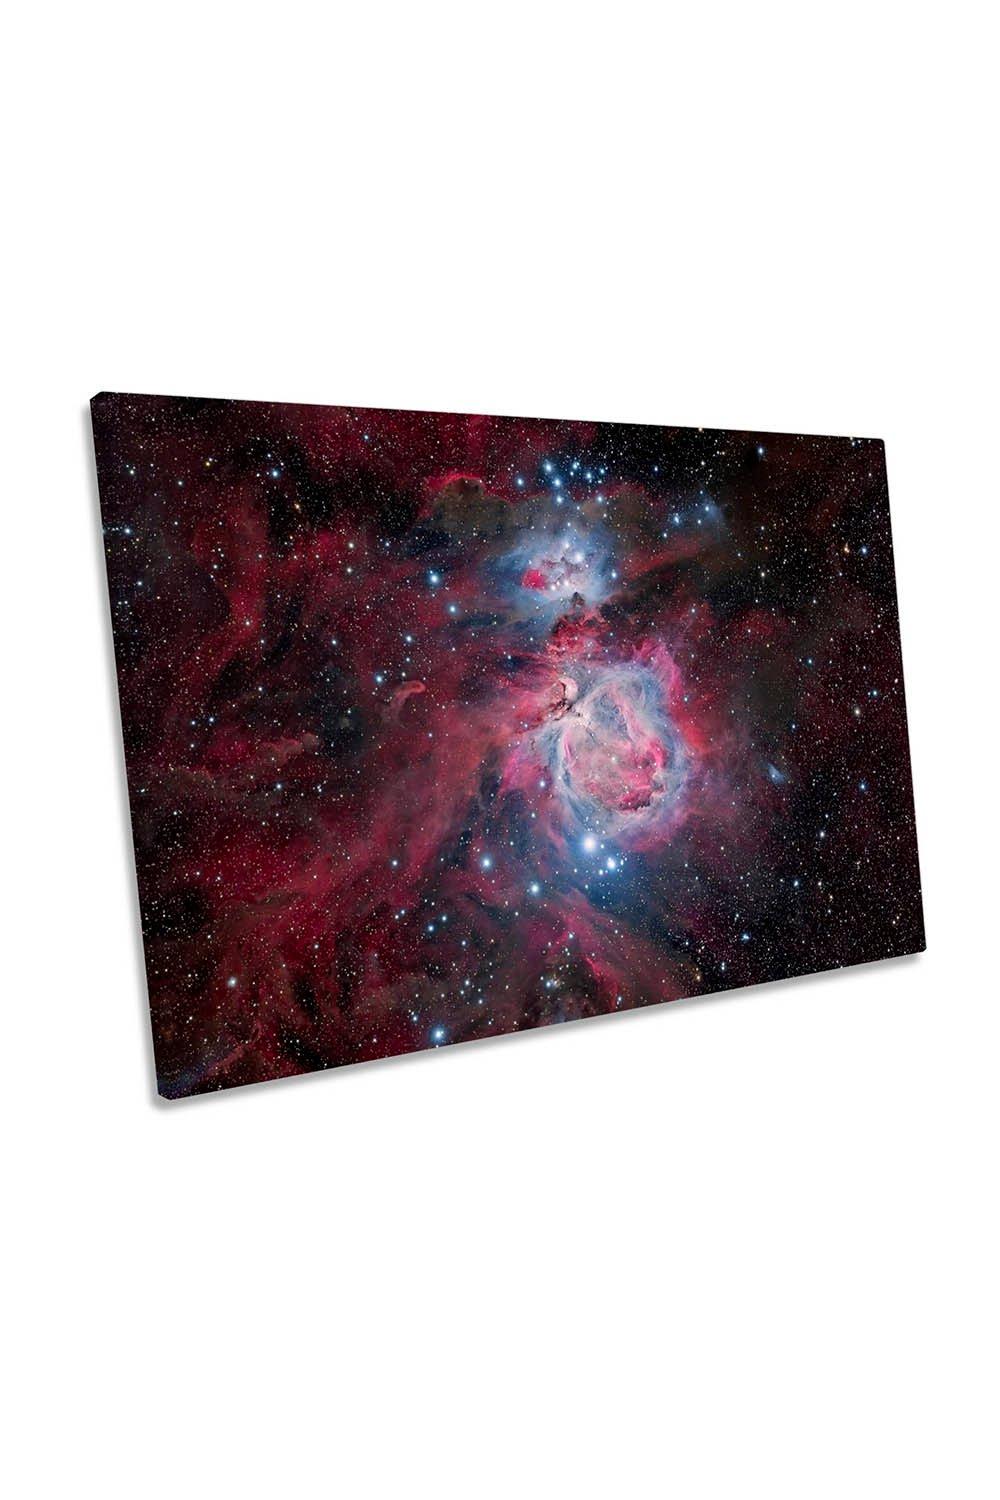 Orion Outer Space Milky Way Nebula Astronomy Canvas Wall Art Picture Print